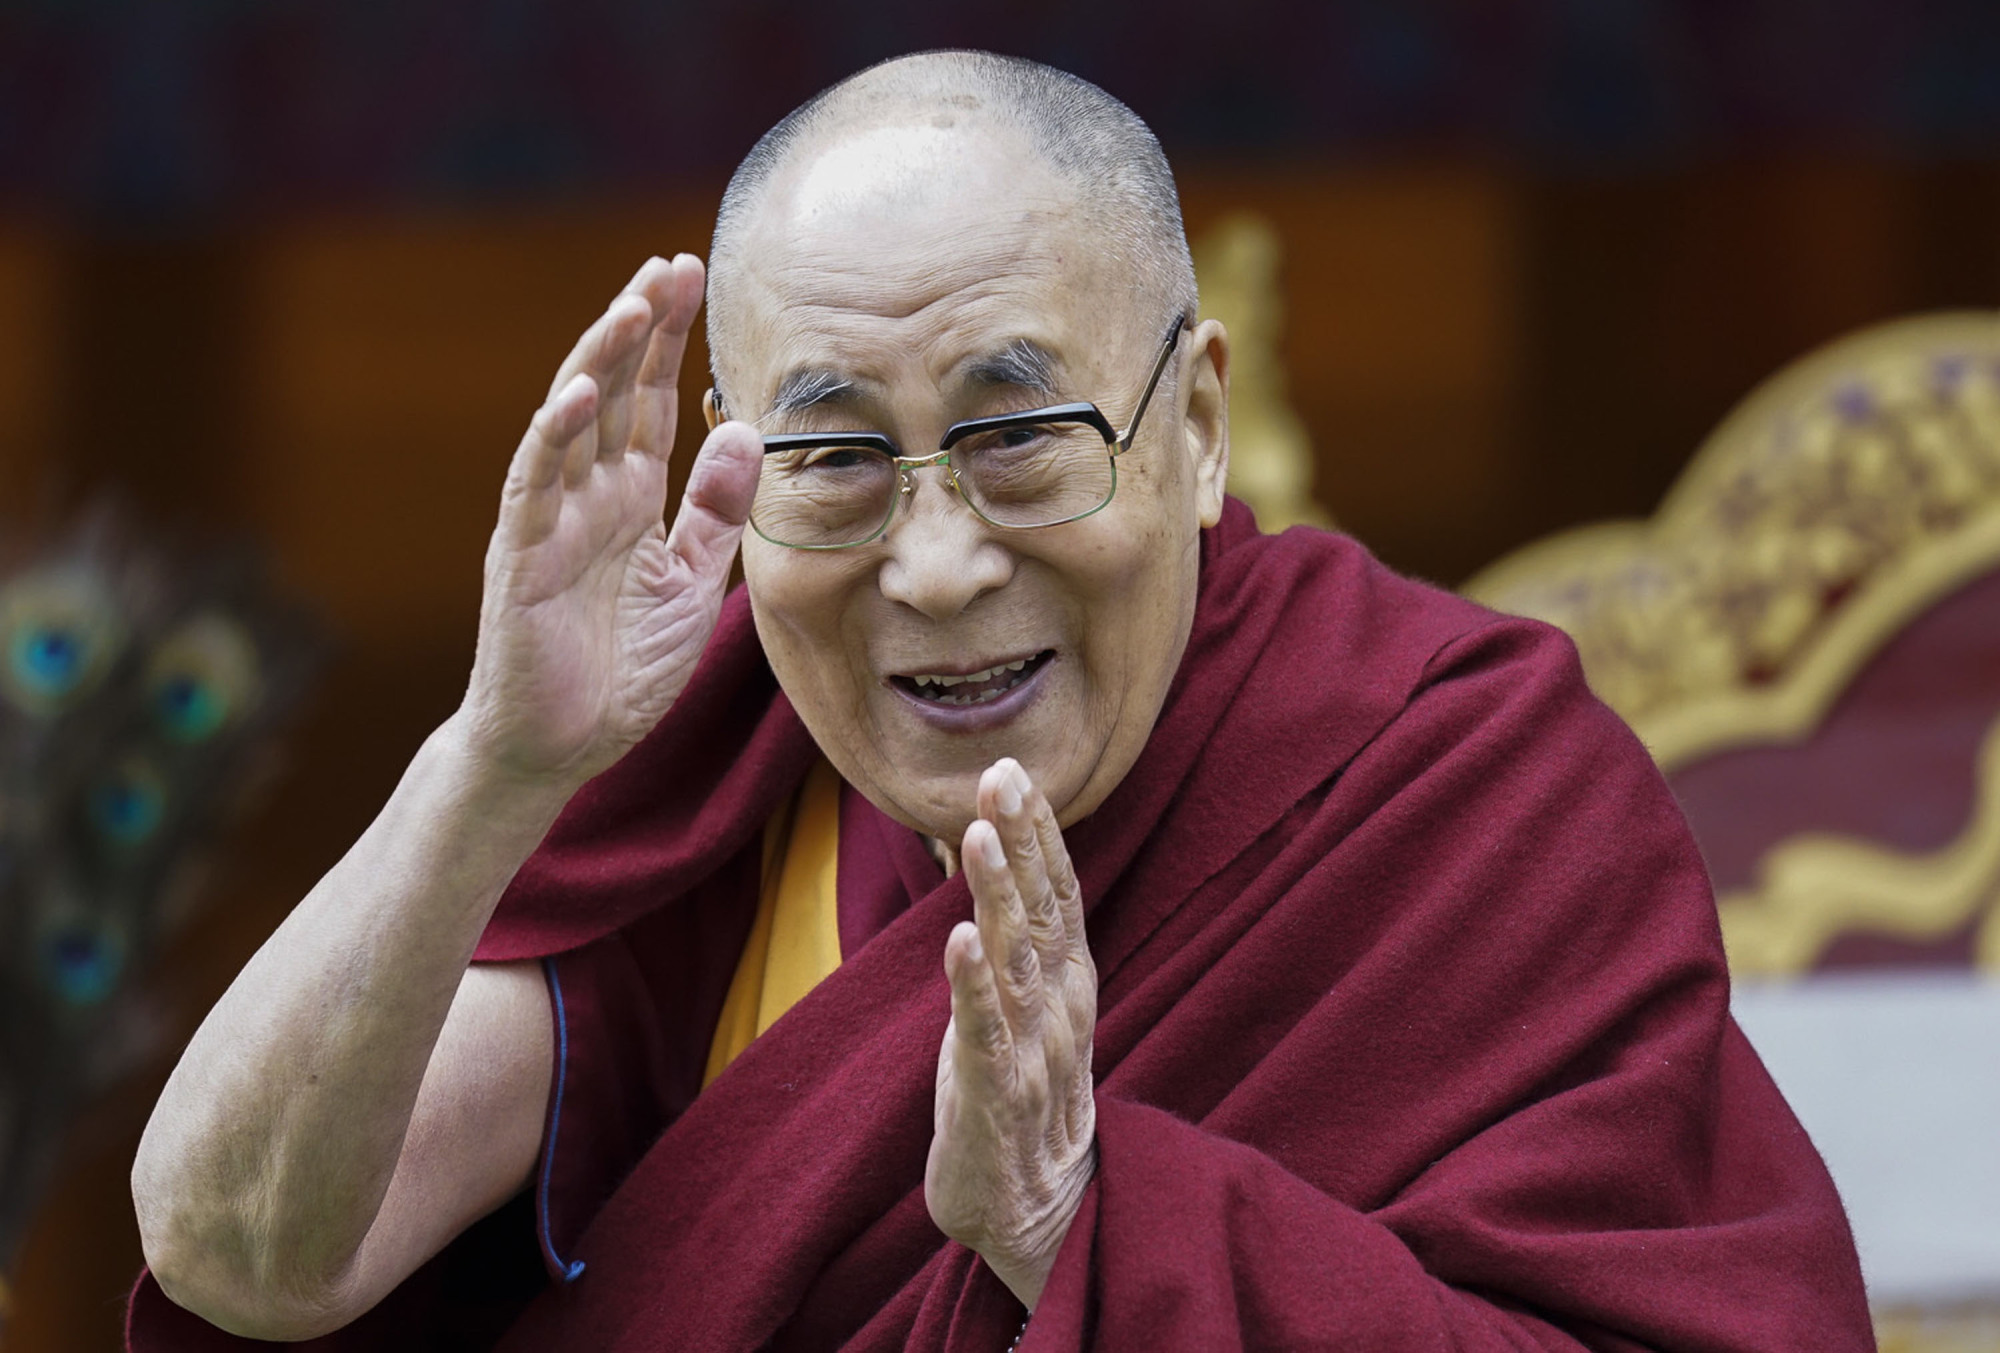 FILE - In this April 5, 2017, file photo, Tibetan spiritual leader the Dalai Lama greets devotees at the Buddha Park in Bomdila, Arunachal Pradesh, India. More than 150 Tibetan religious leaders say their spiritual leader, the Dalai Lama, should have the sole authority to choose his successor. A resolution adopted by the leaders at a conference on Wednesday, Nov. 27, 2019, says the Tibetan people will not recognize a candidate chosen by the Chinese government for political ends. ( AP Photo/Tenzin Choejor, File)